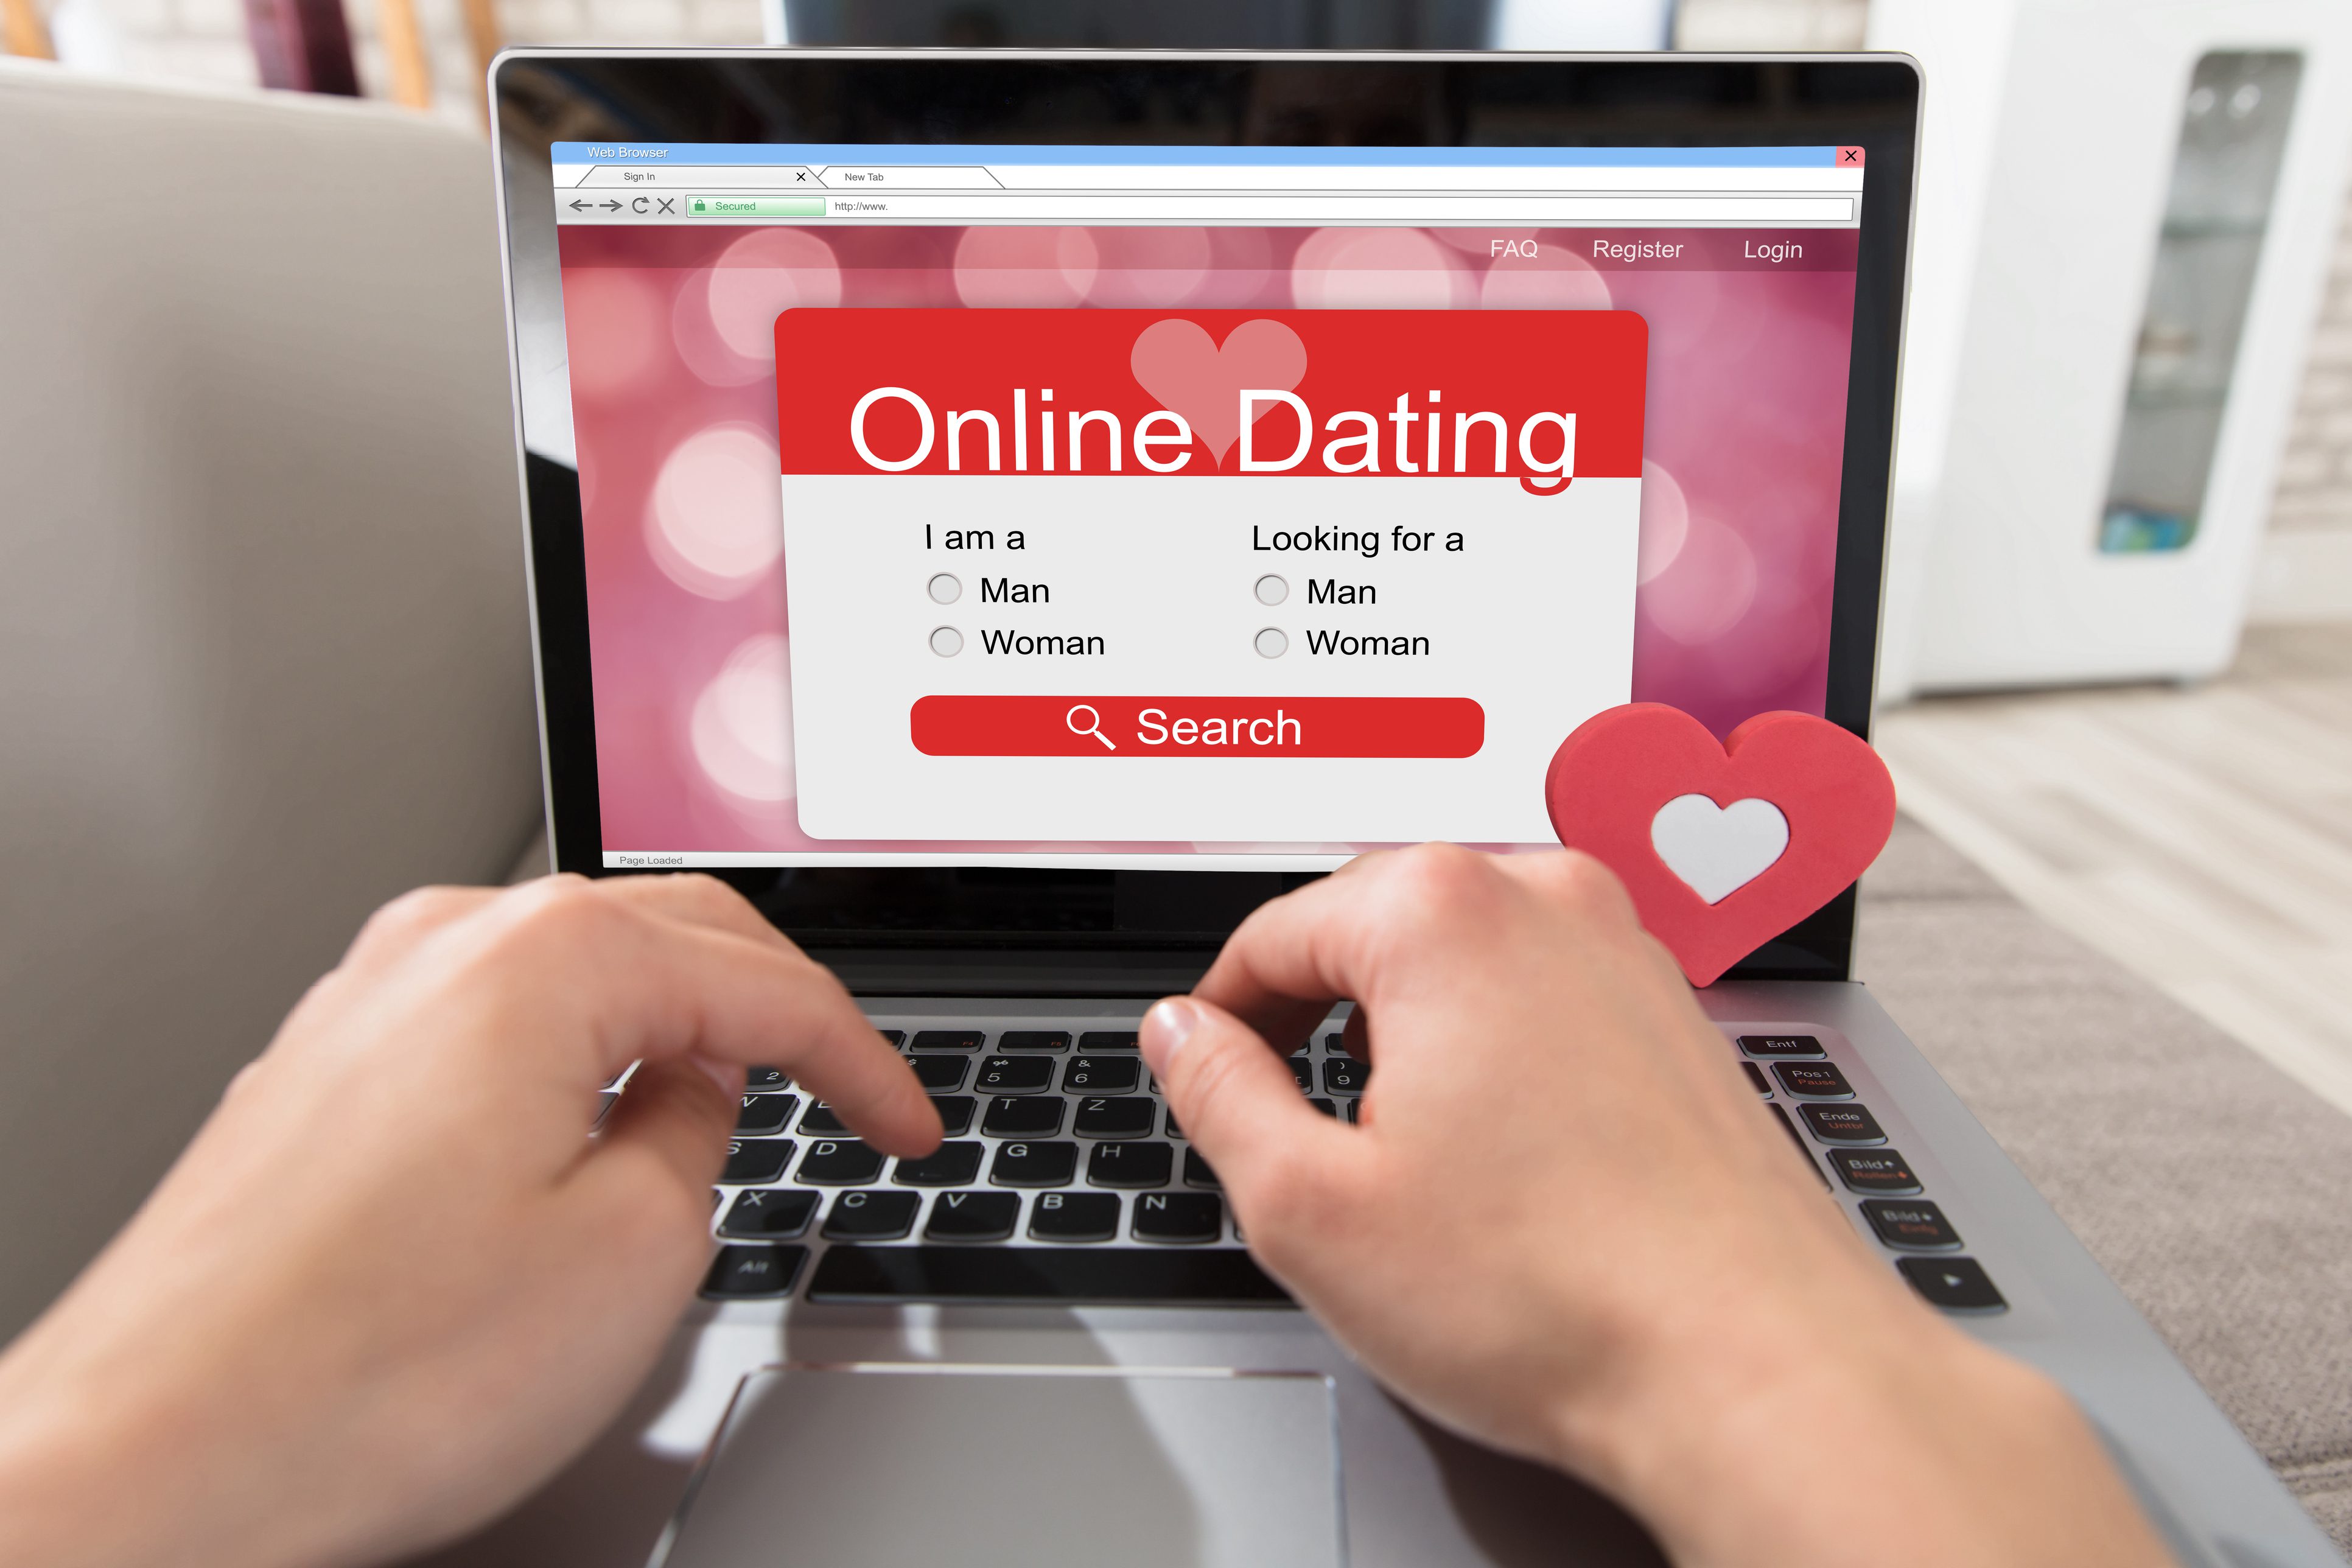 Girls And Guys: What Do You Think Of Online Dating?